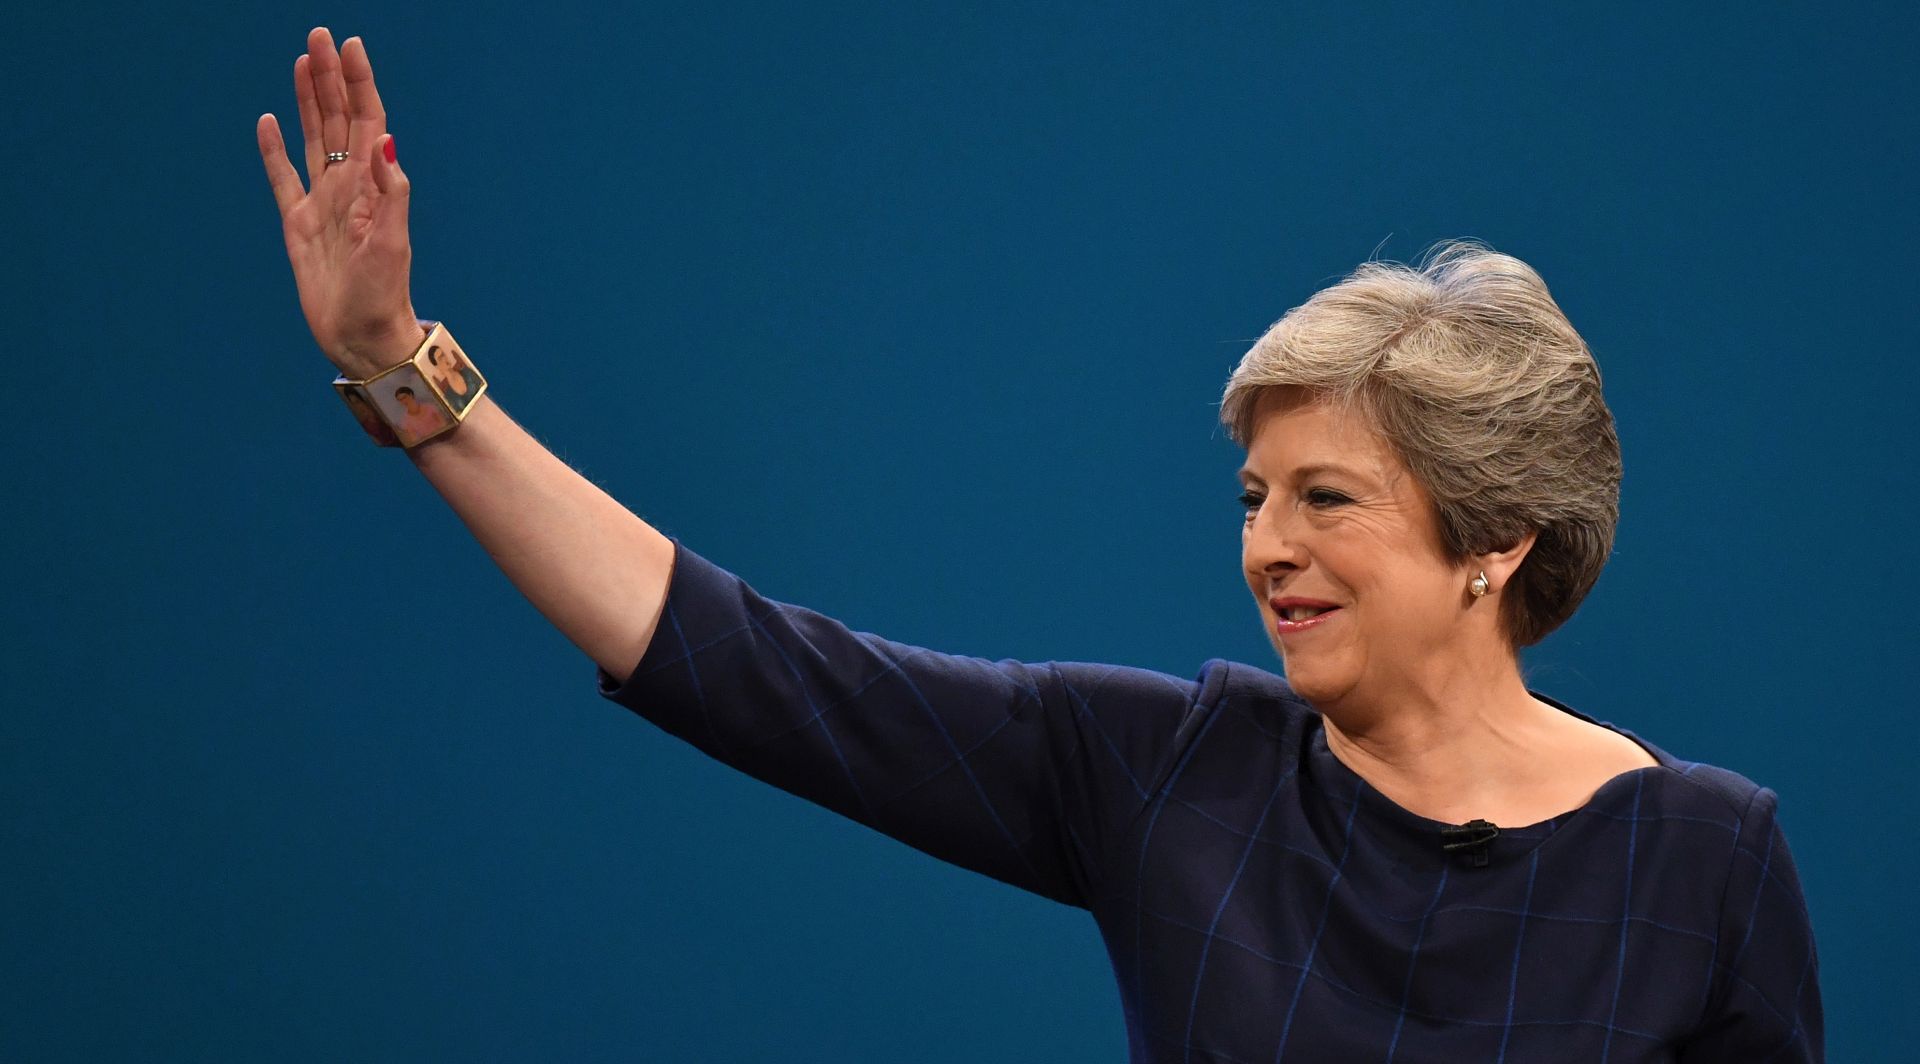 epa07467341 (FILE) - Britain's Prime Minister Theresa May waves to delegates as she delivers her speech on the final day of Conservative Party Conference in Manchester, Britain, 04 October 2017 (reissued 27 March 2019). According to reports, British Prime Minister Theresa May on 27 March 2019 promised MPs of her Conservative party that she will step down from her office, as British parliament is holding indicative votes in the course of the evening.  EPA/FACUNDO ARRIZABALAGA *** Local Caption *** 53808979